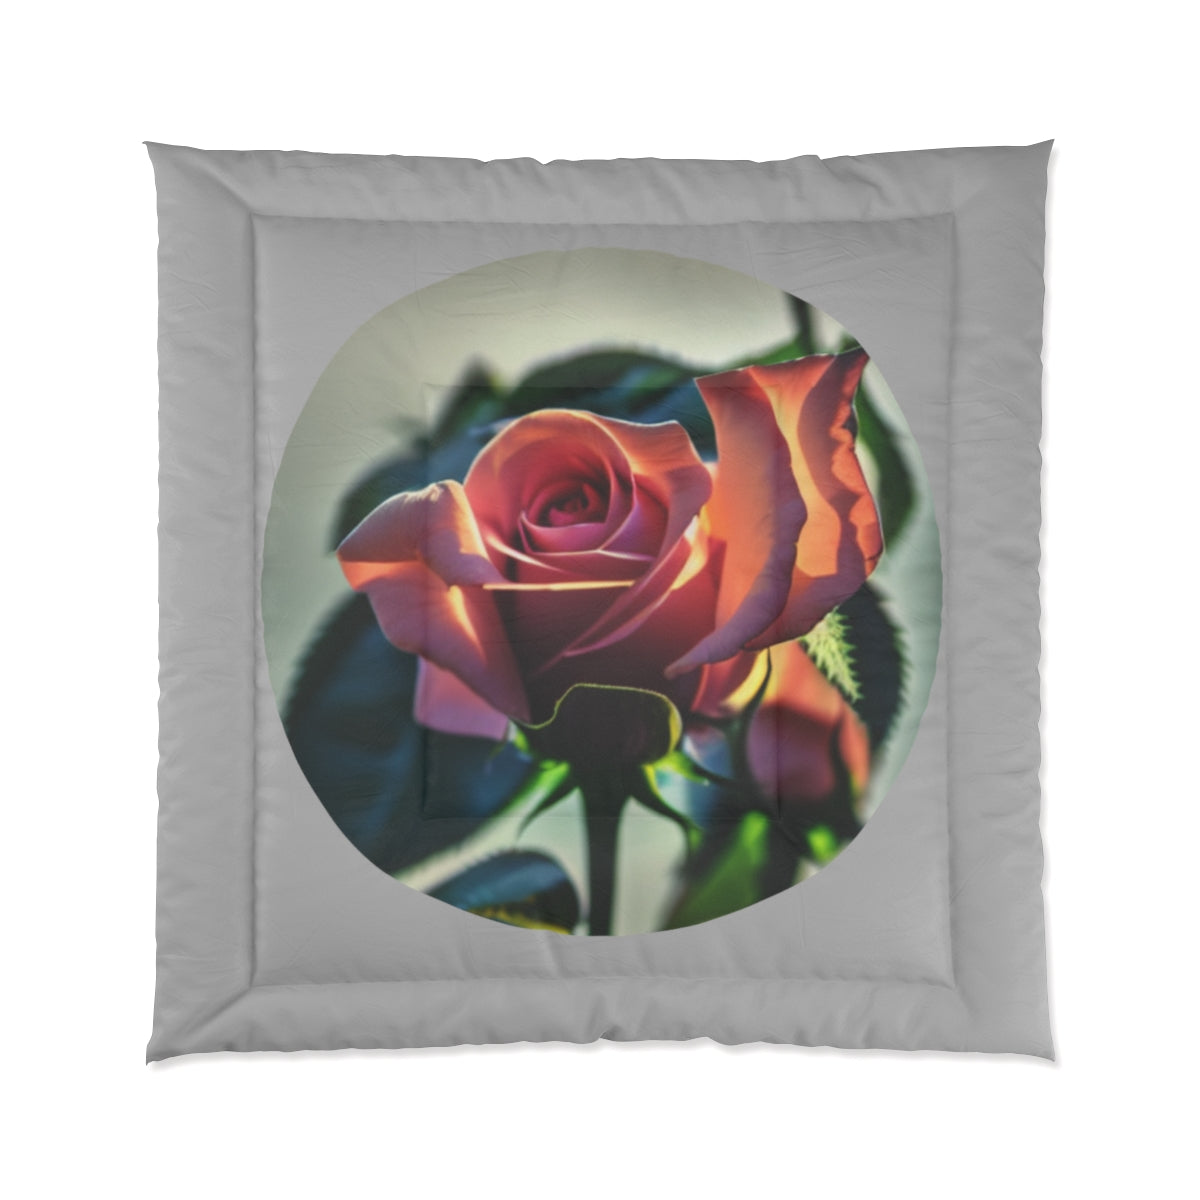 The Rose Comforter